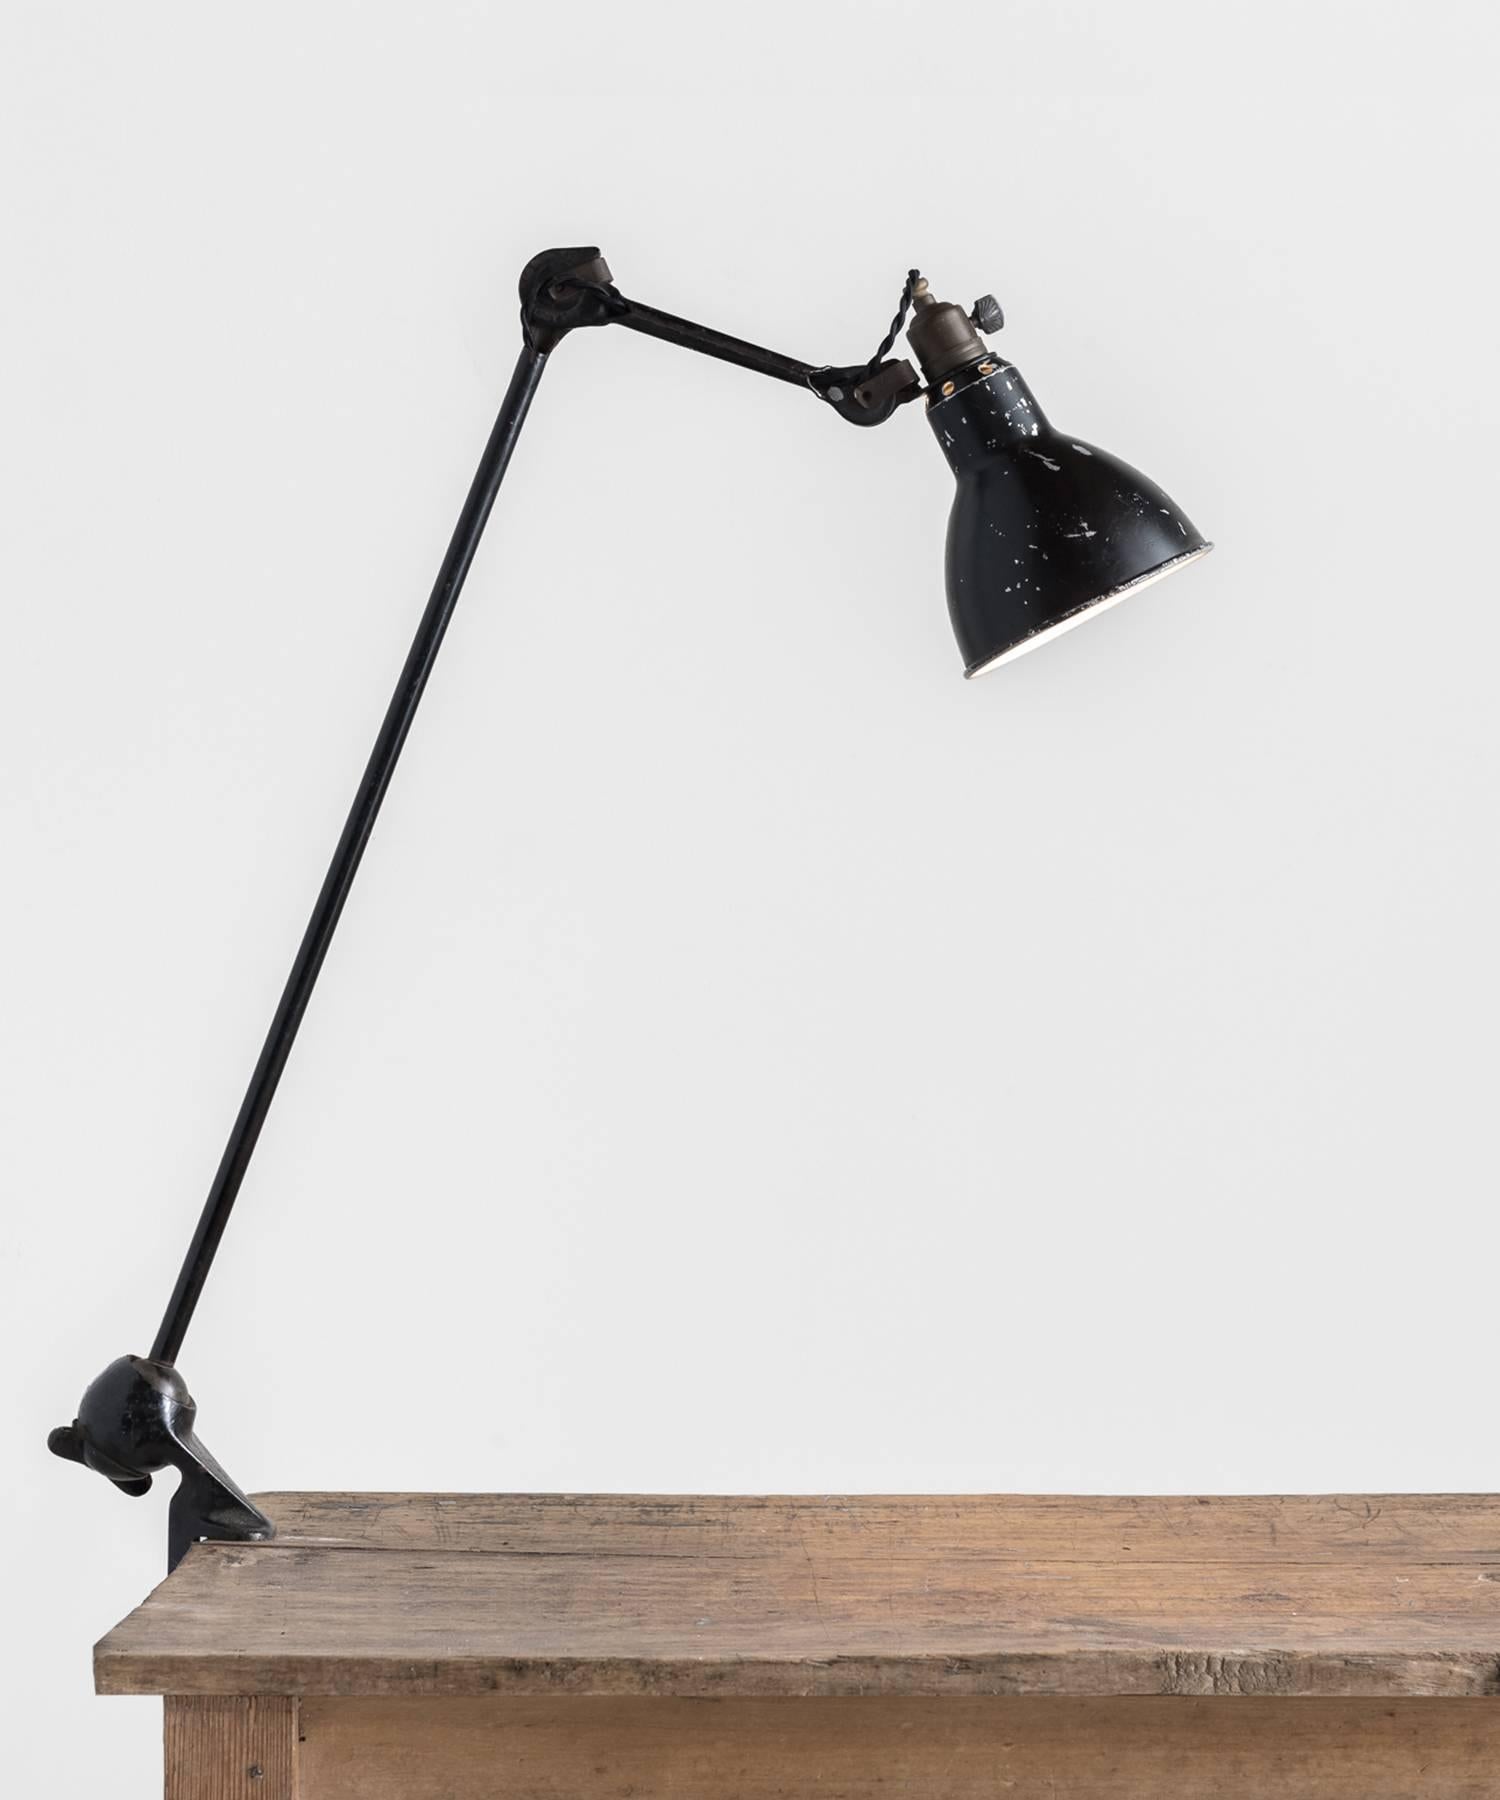 Gras lamp no. 201, circa 1930.

Industrial clamp on desk lamp with three points of adjustment, designed by Bernard-Albin Gras.

Measures: 5.5